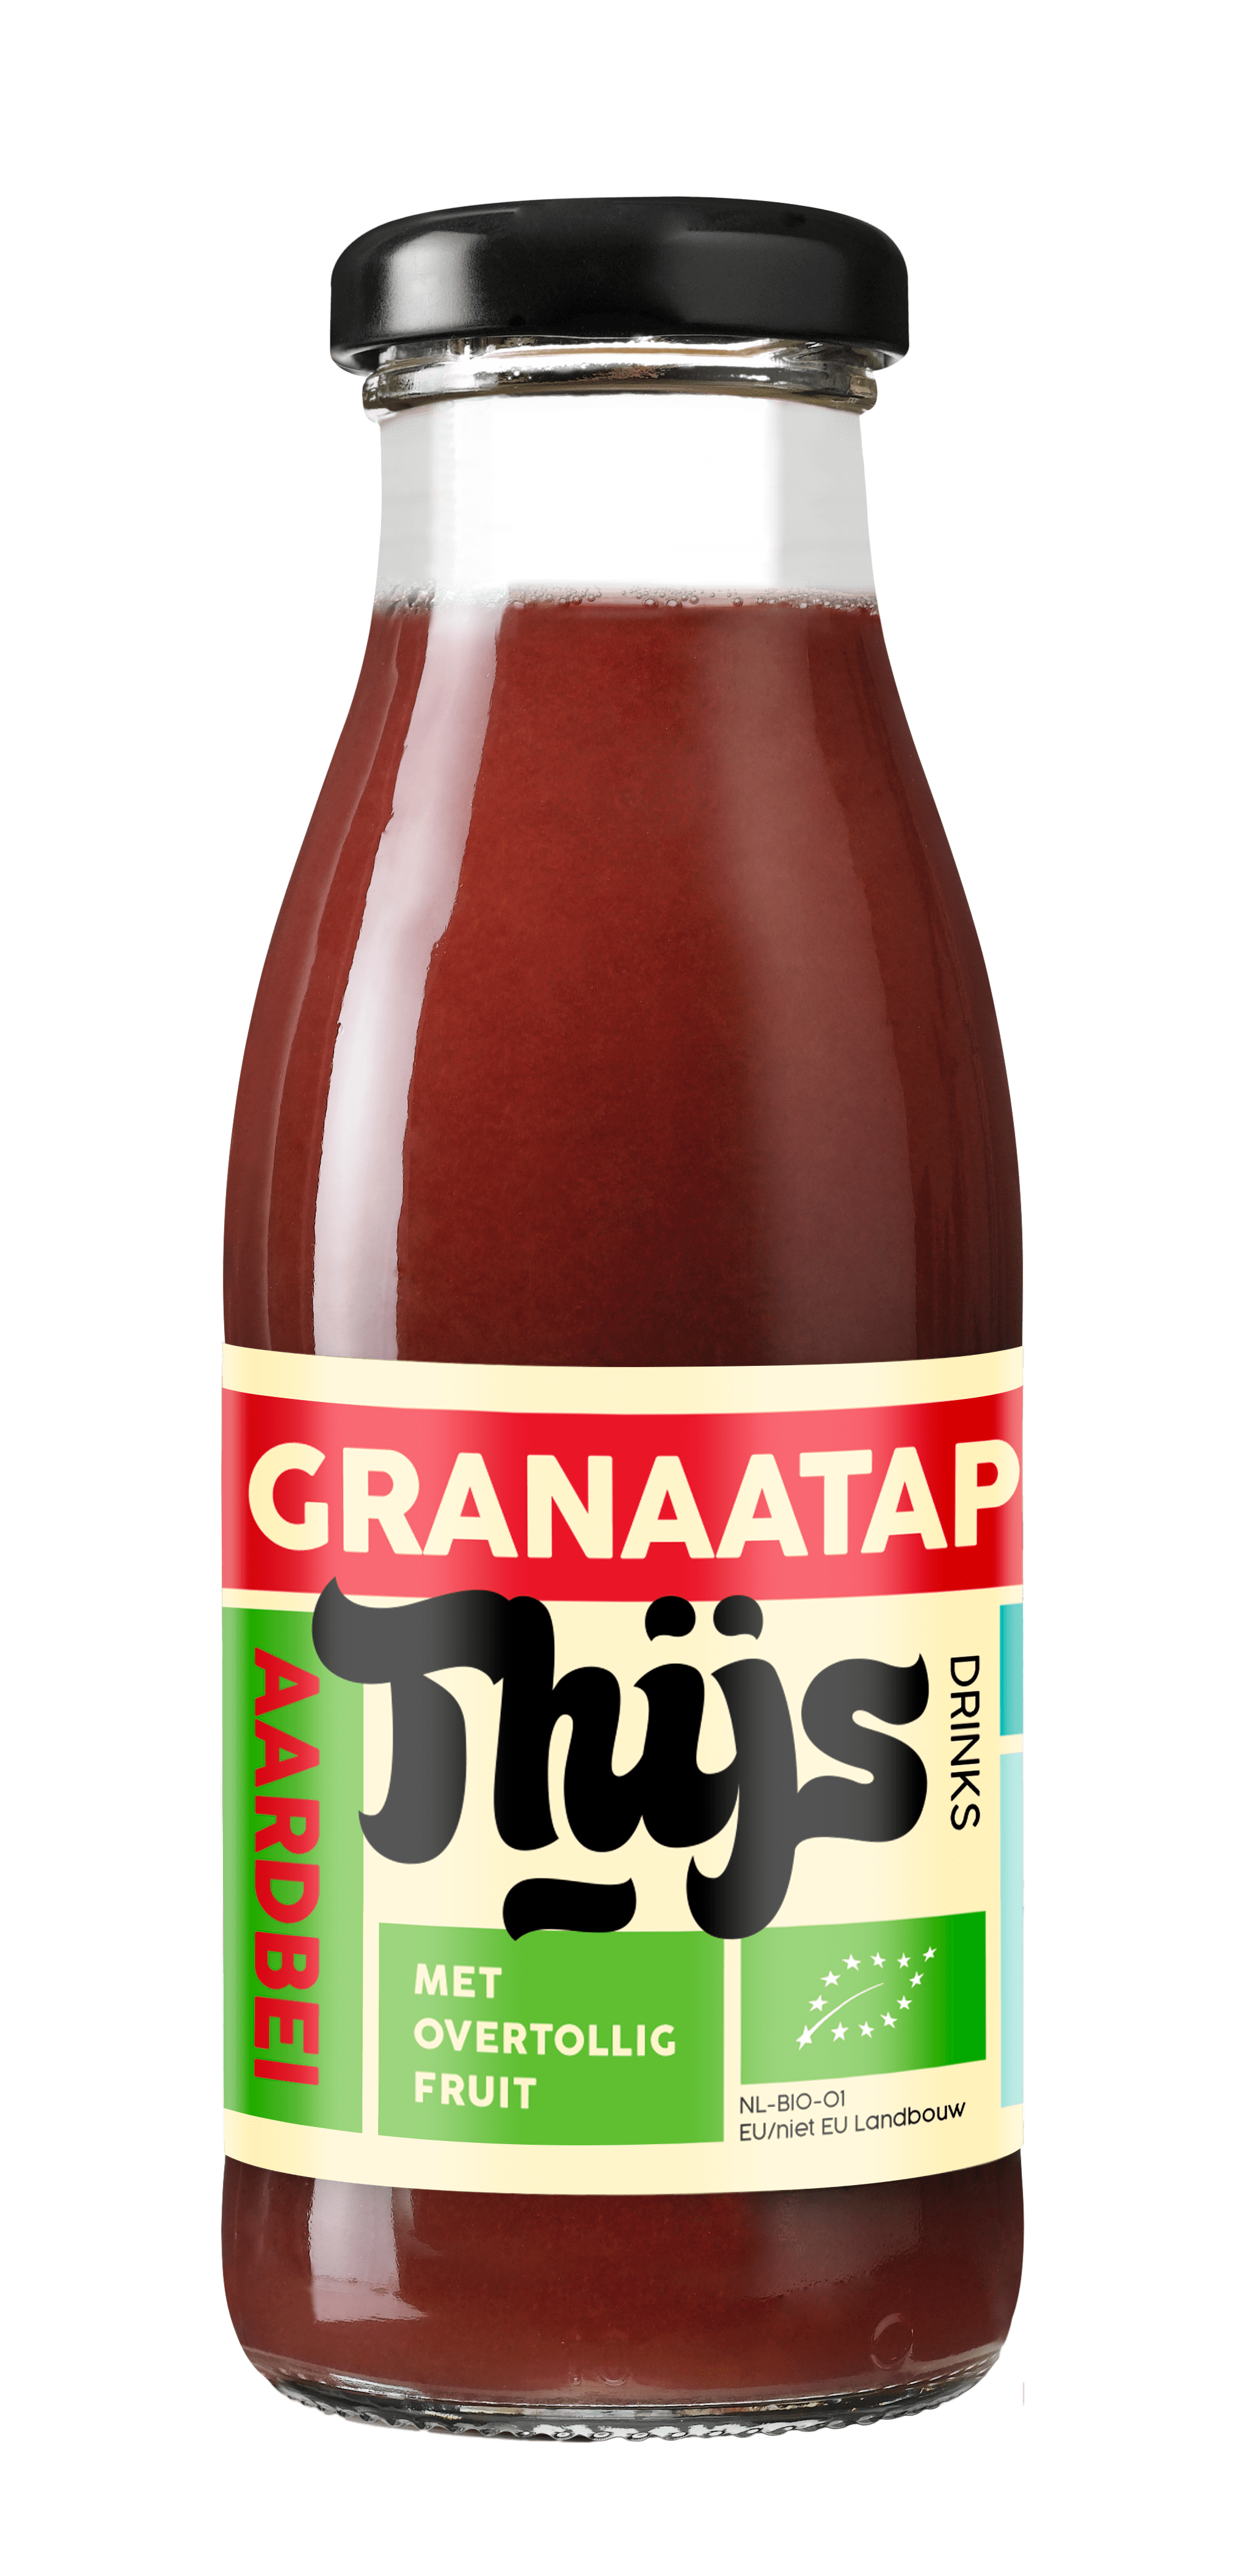 Bottle of pomegranate-strawberry juice by THIJS drinks